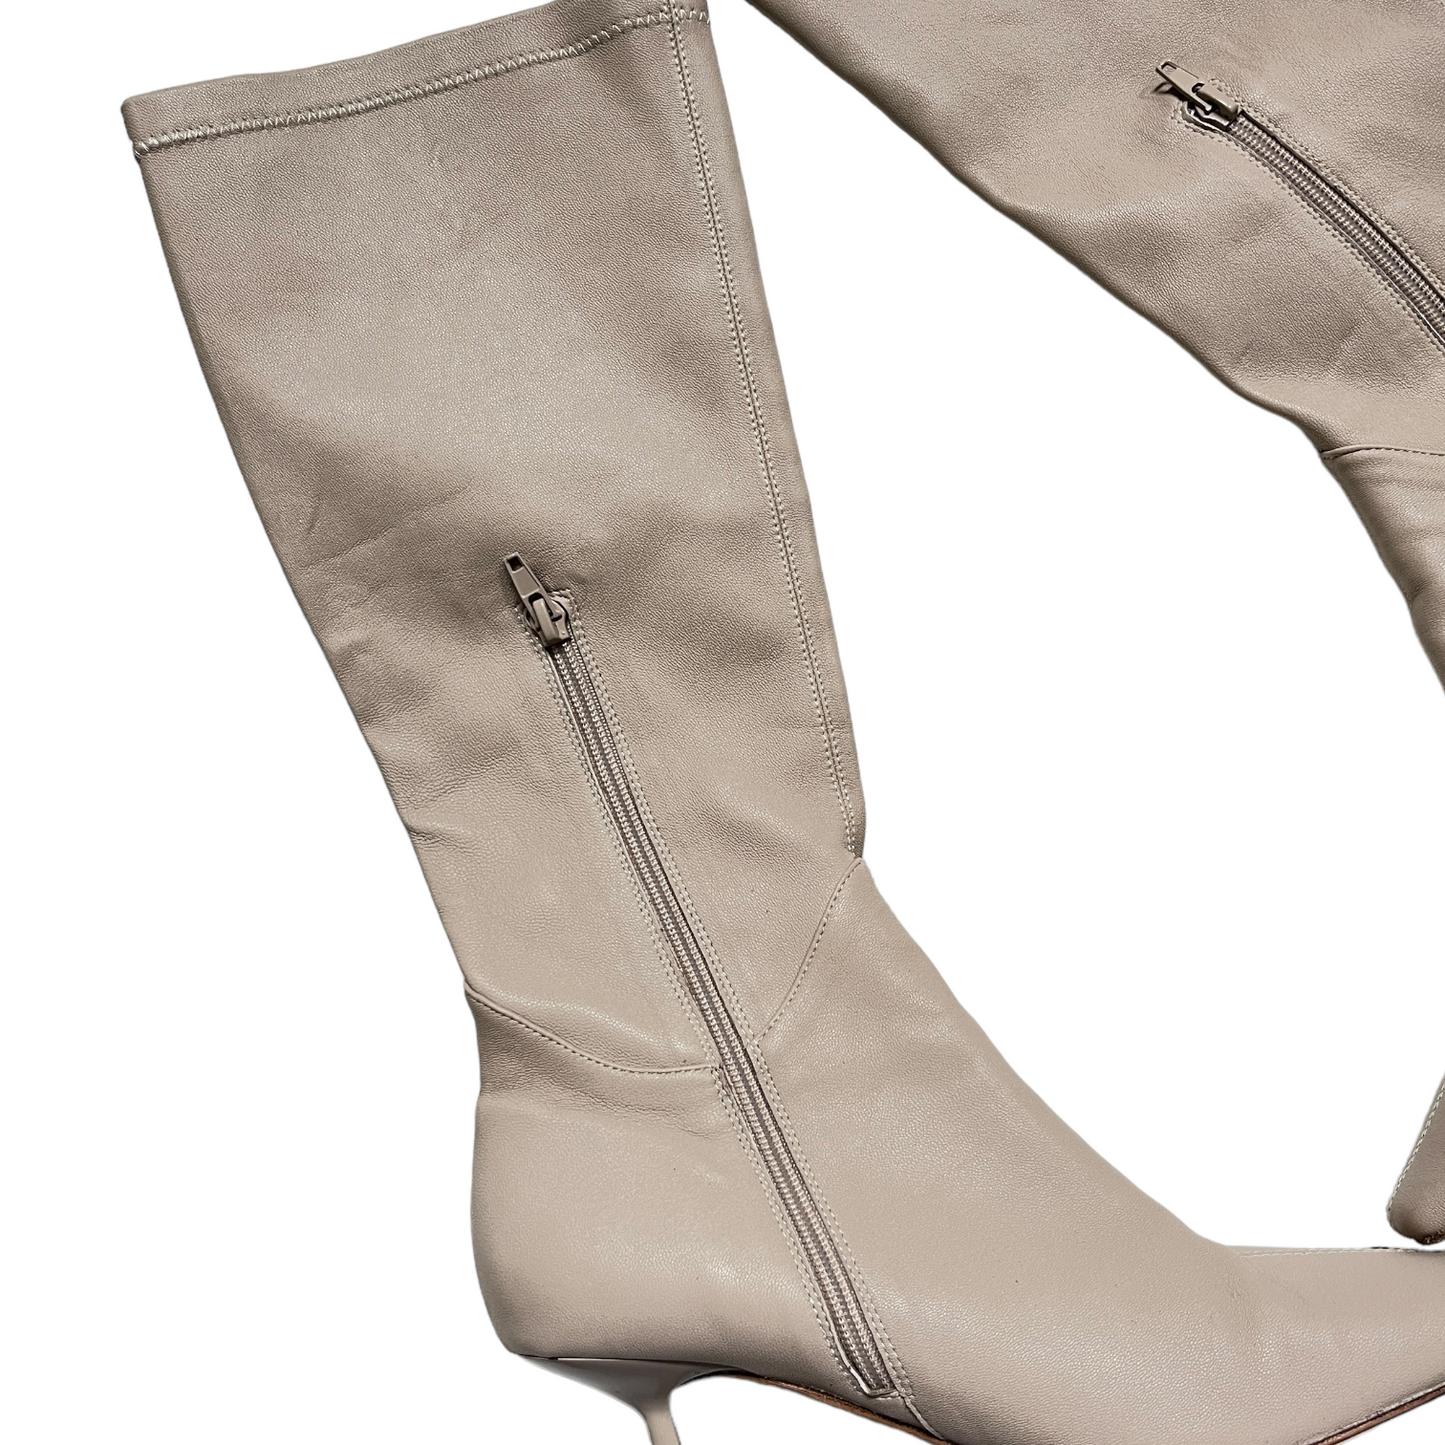 Song of Style Brit Boot in Cream